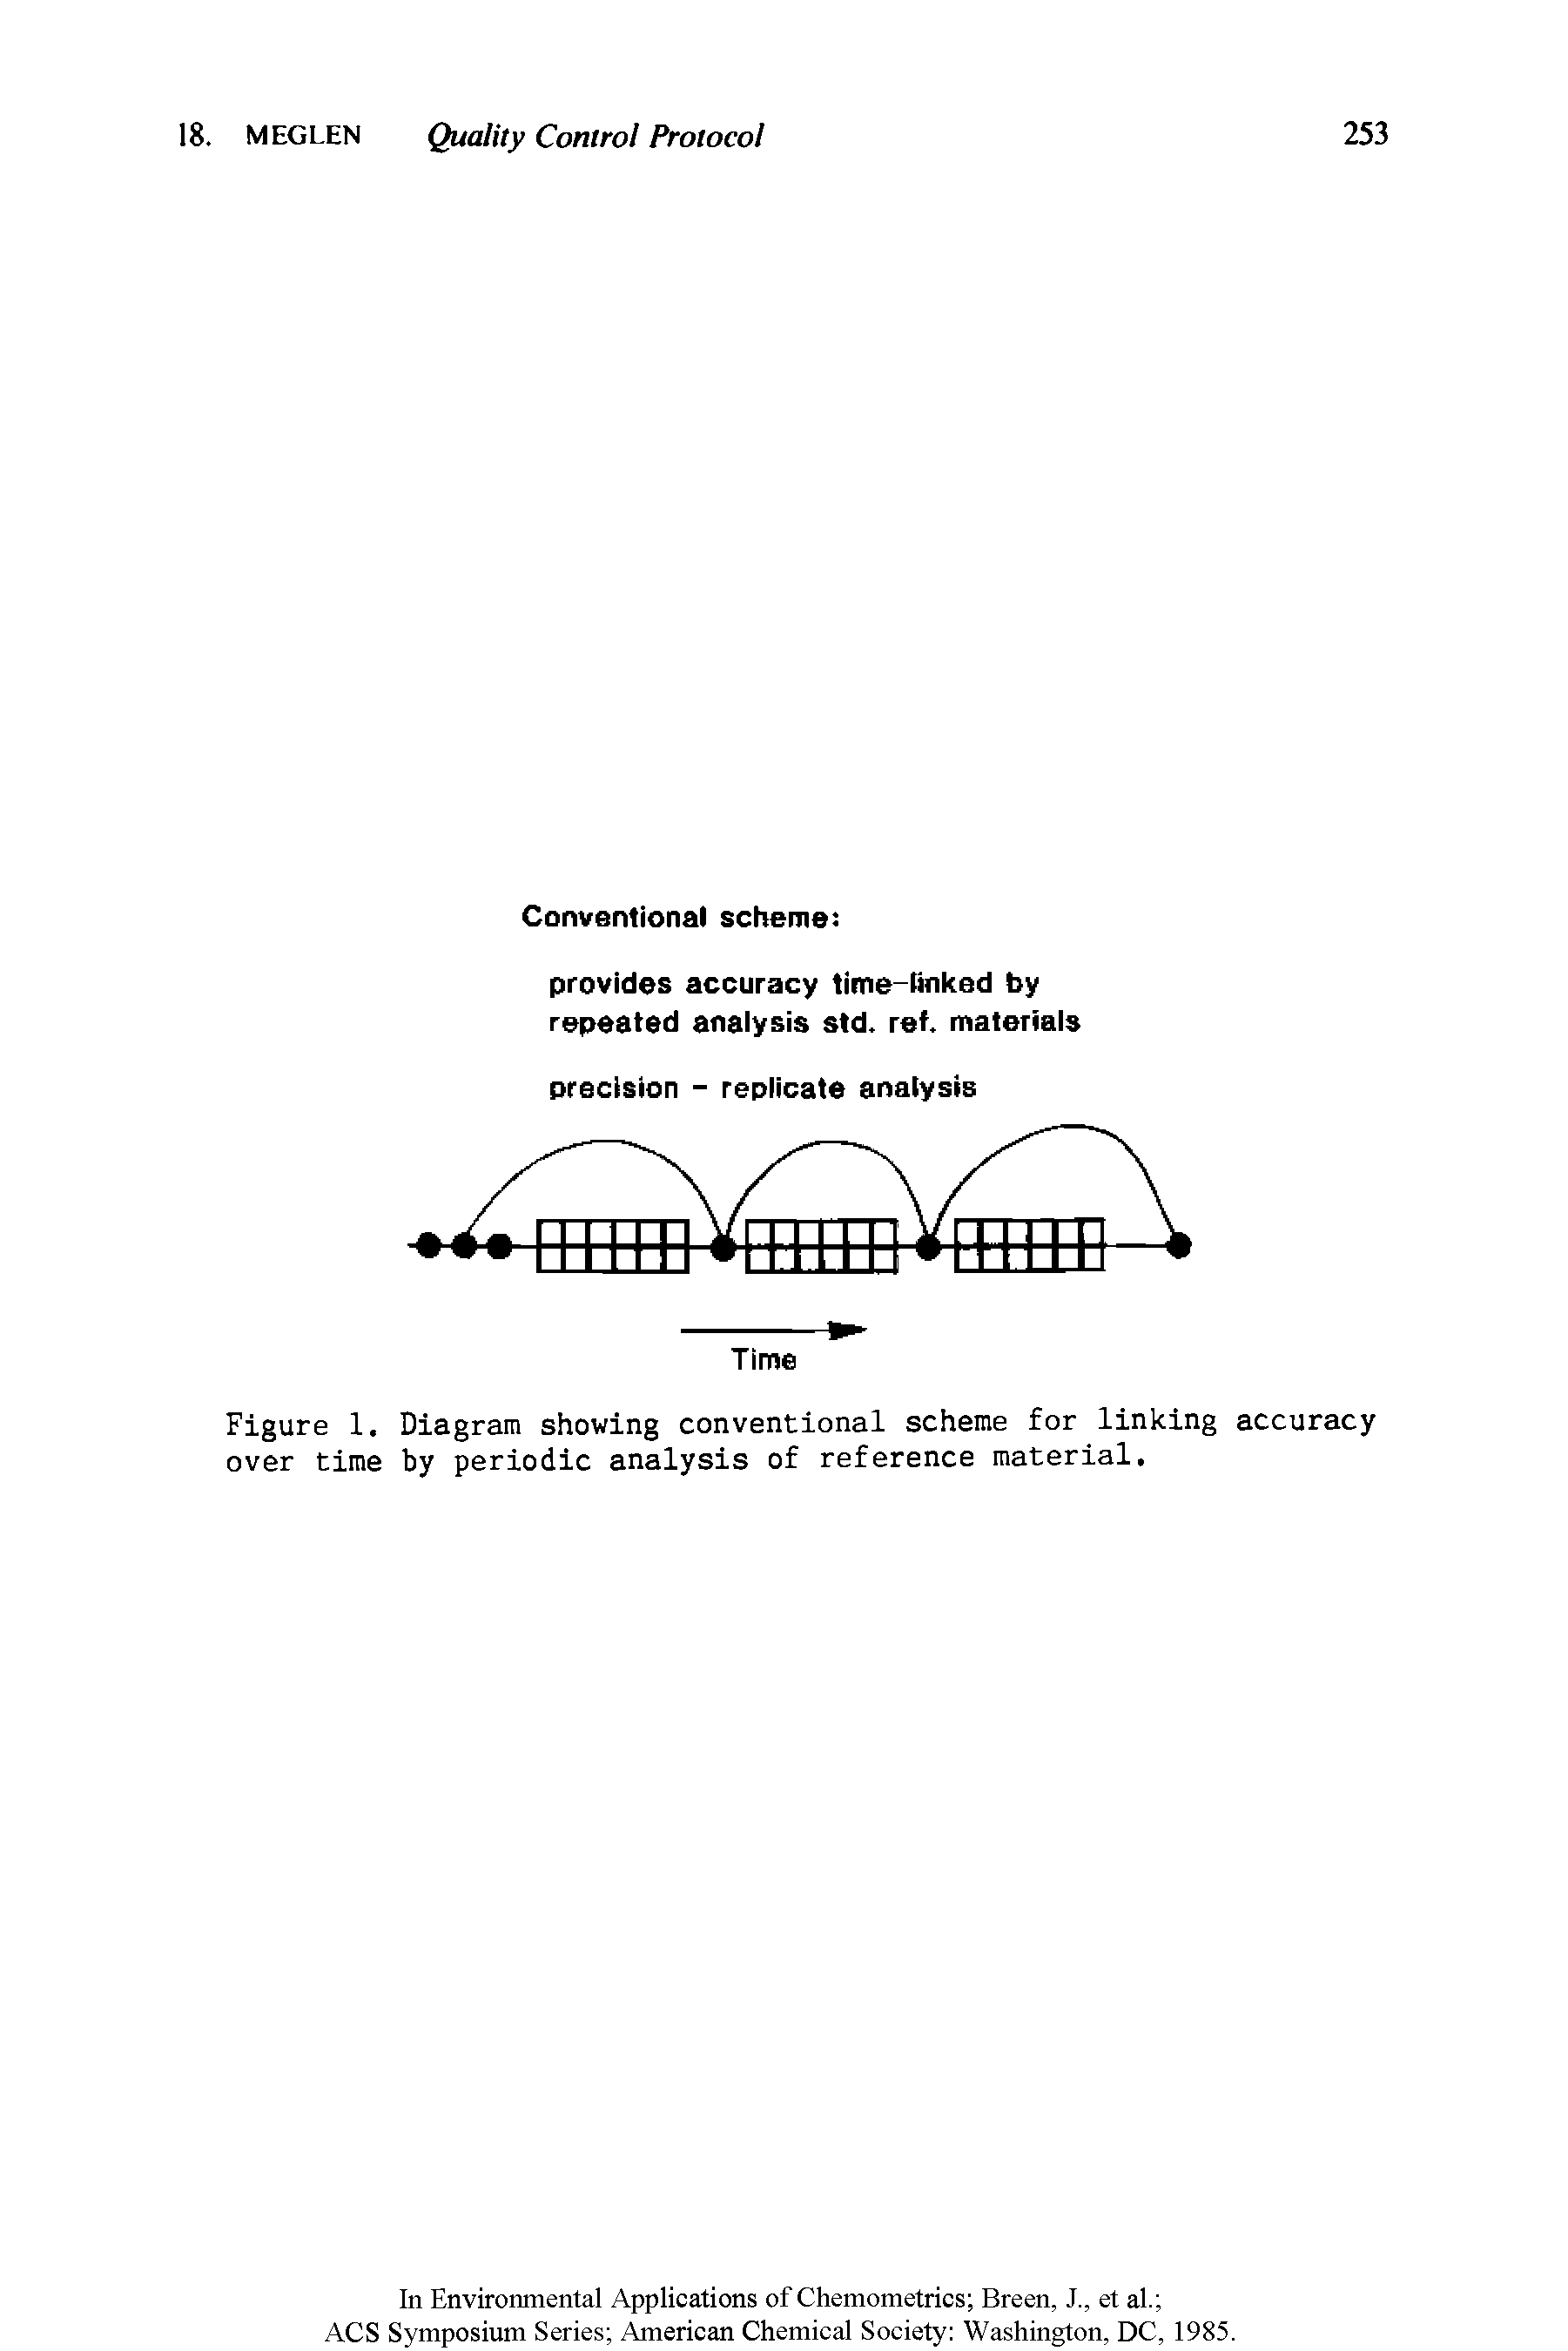 Figure 1. Diagram showing conventional scheme for linking accuracy over time by periodic analysis of reference material.